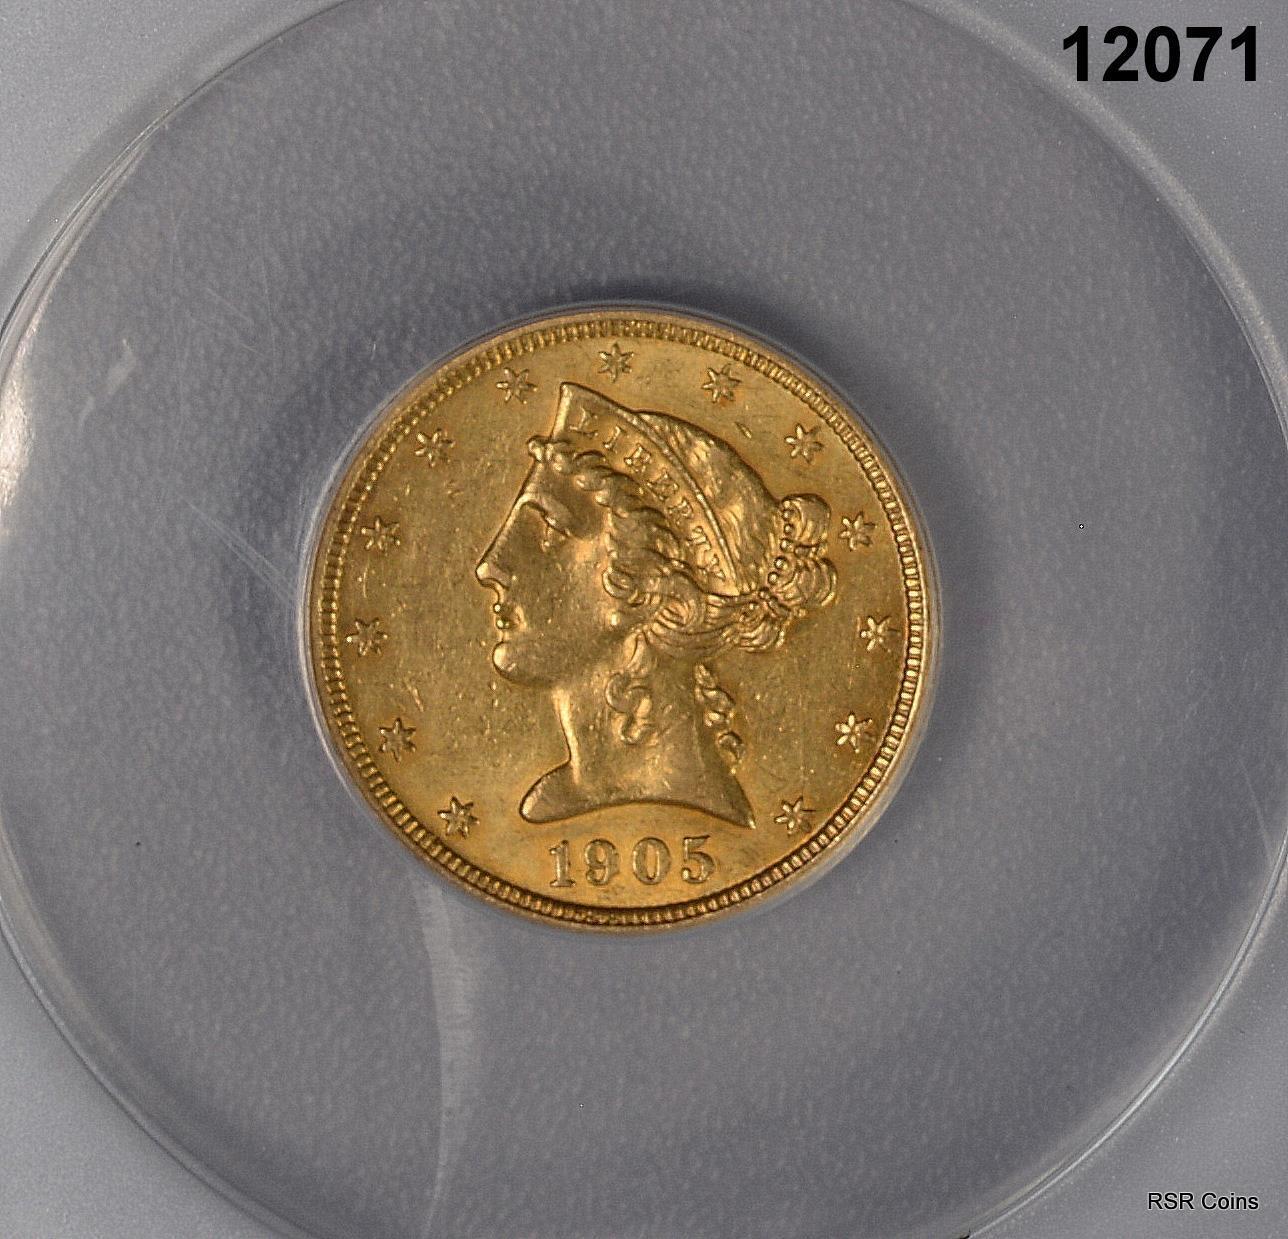 1905 $5 GOLD LIBERTY ANACS CERTIFIED AU53 CLEANED LOOKS BETTER! #12071